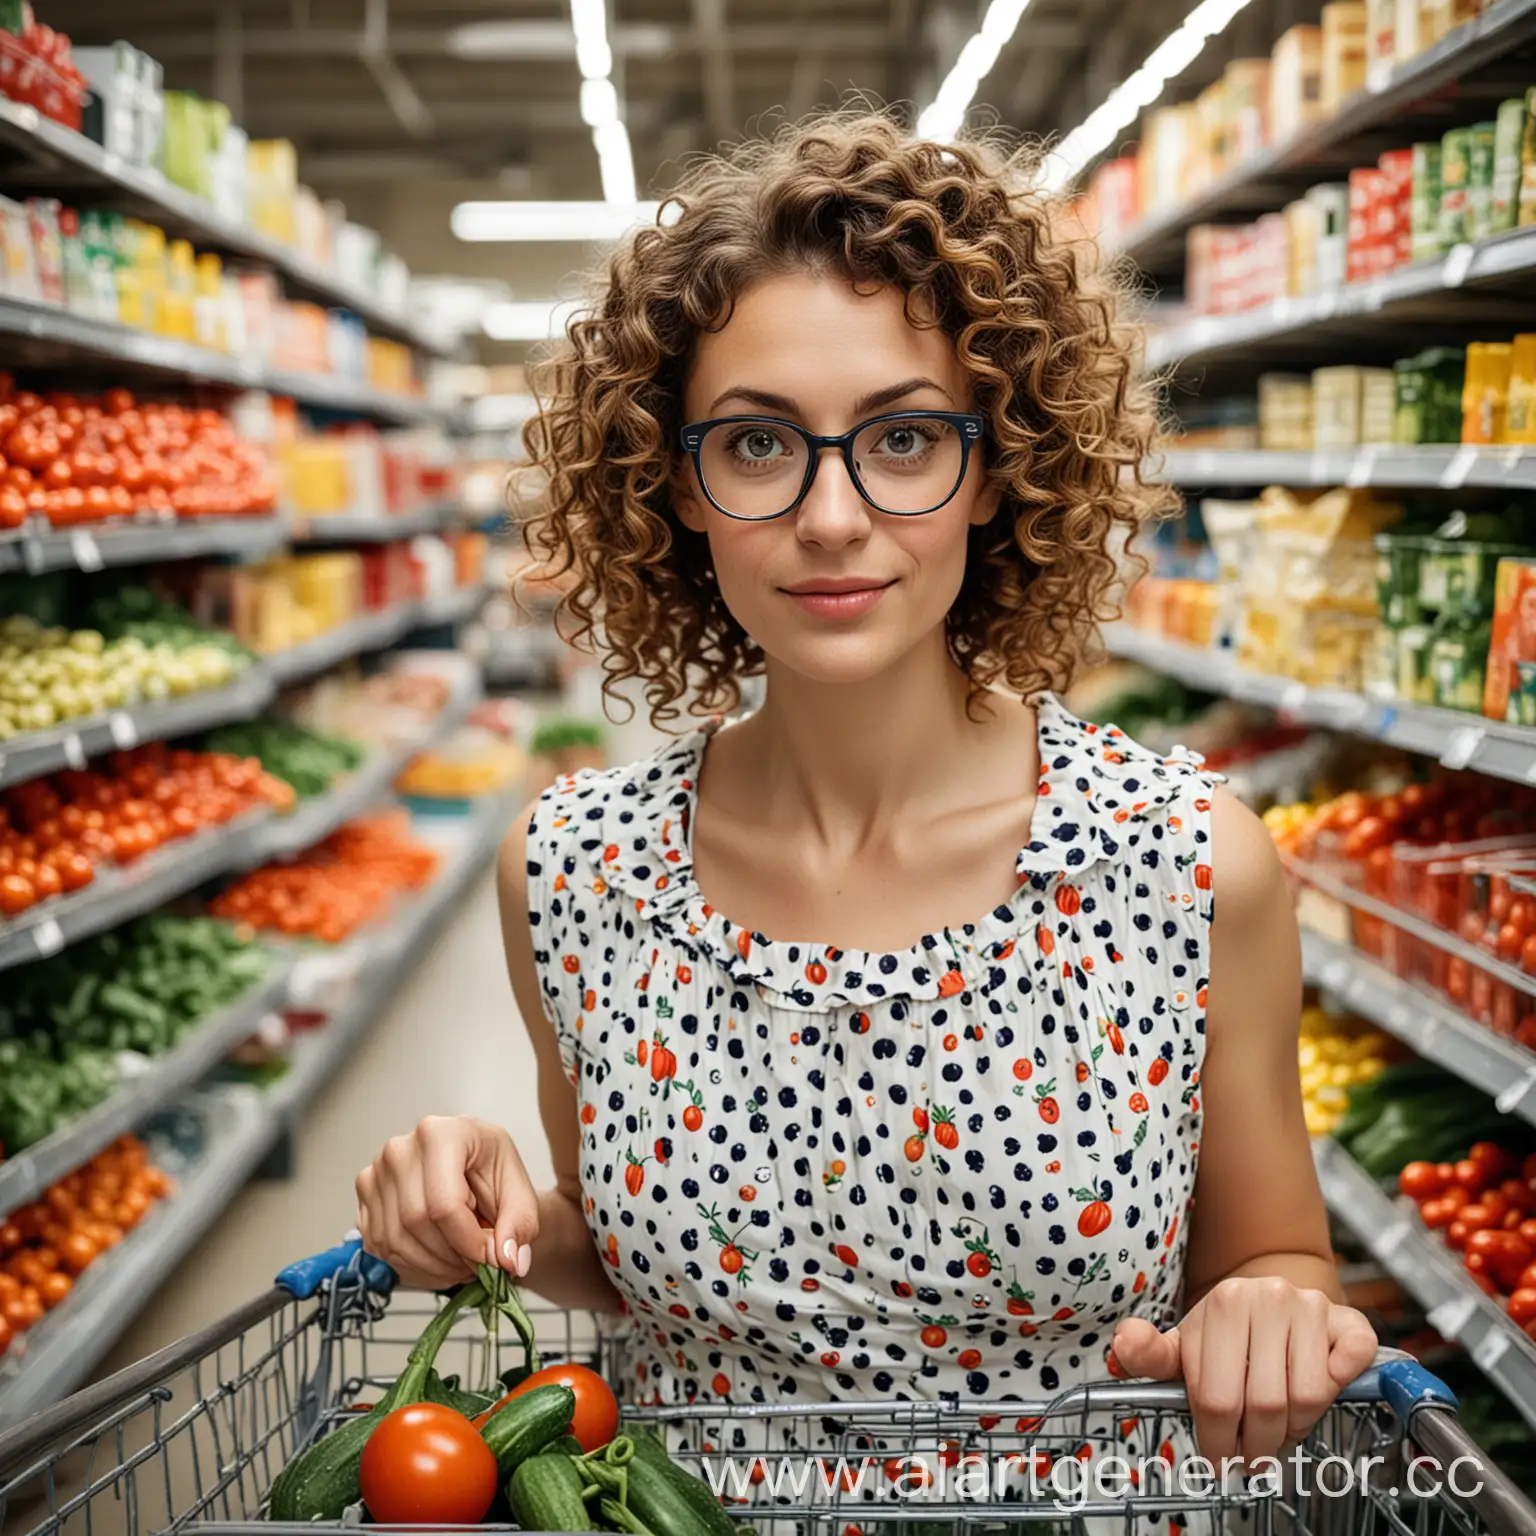 Woman-Shopping-for-Fresh-Groceries-in-Supermarket